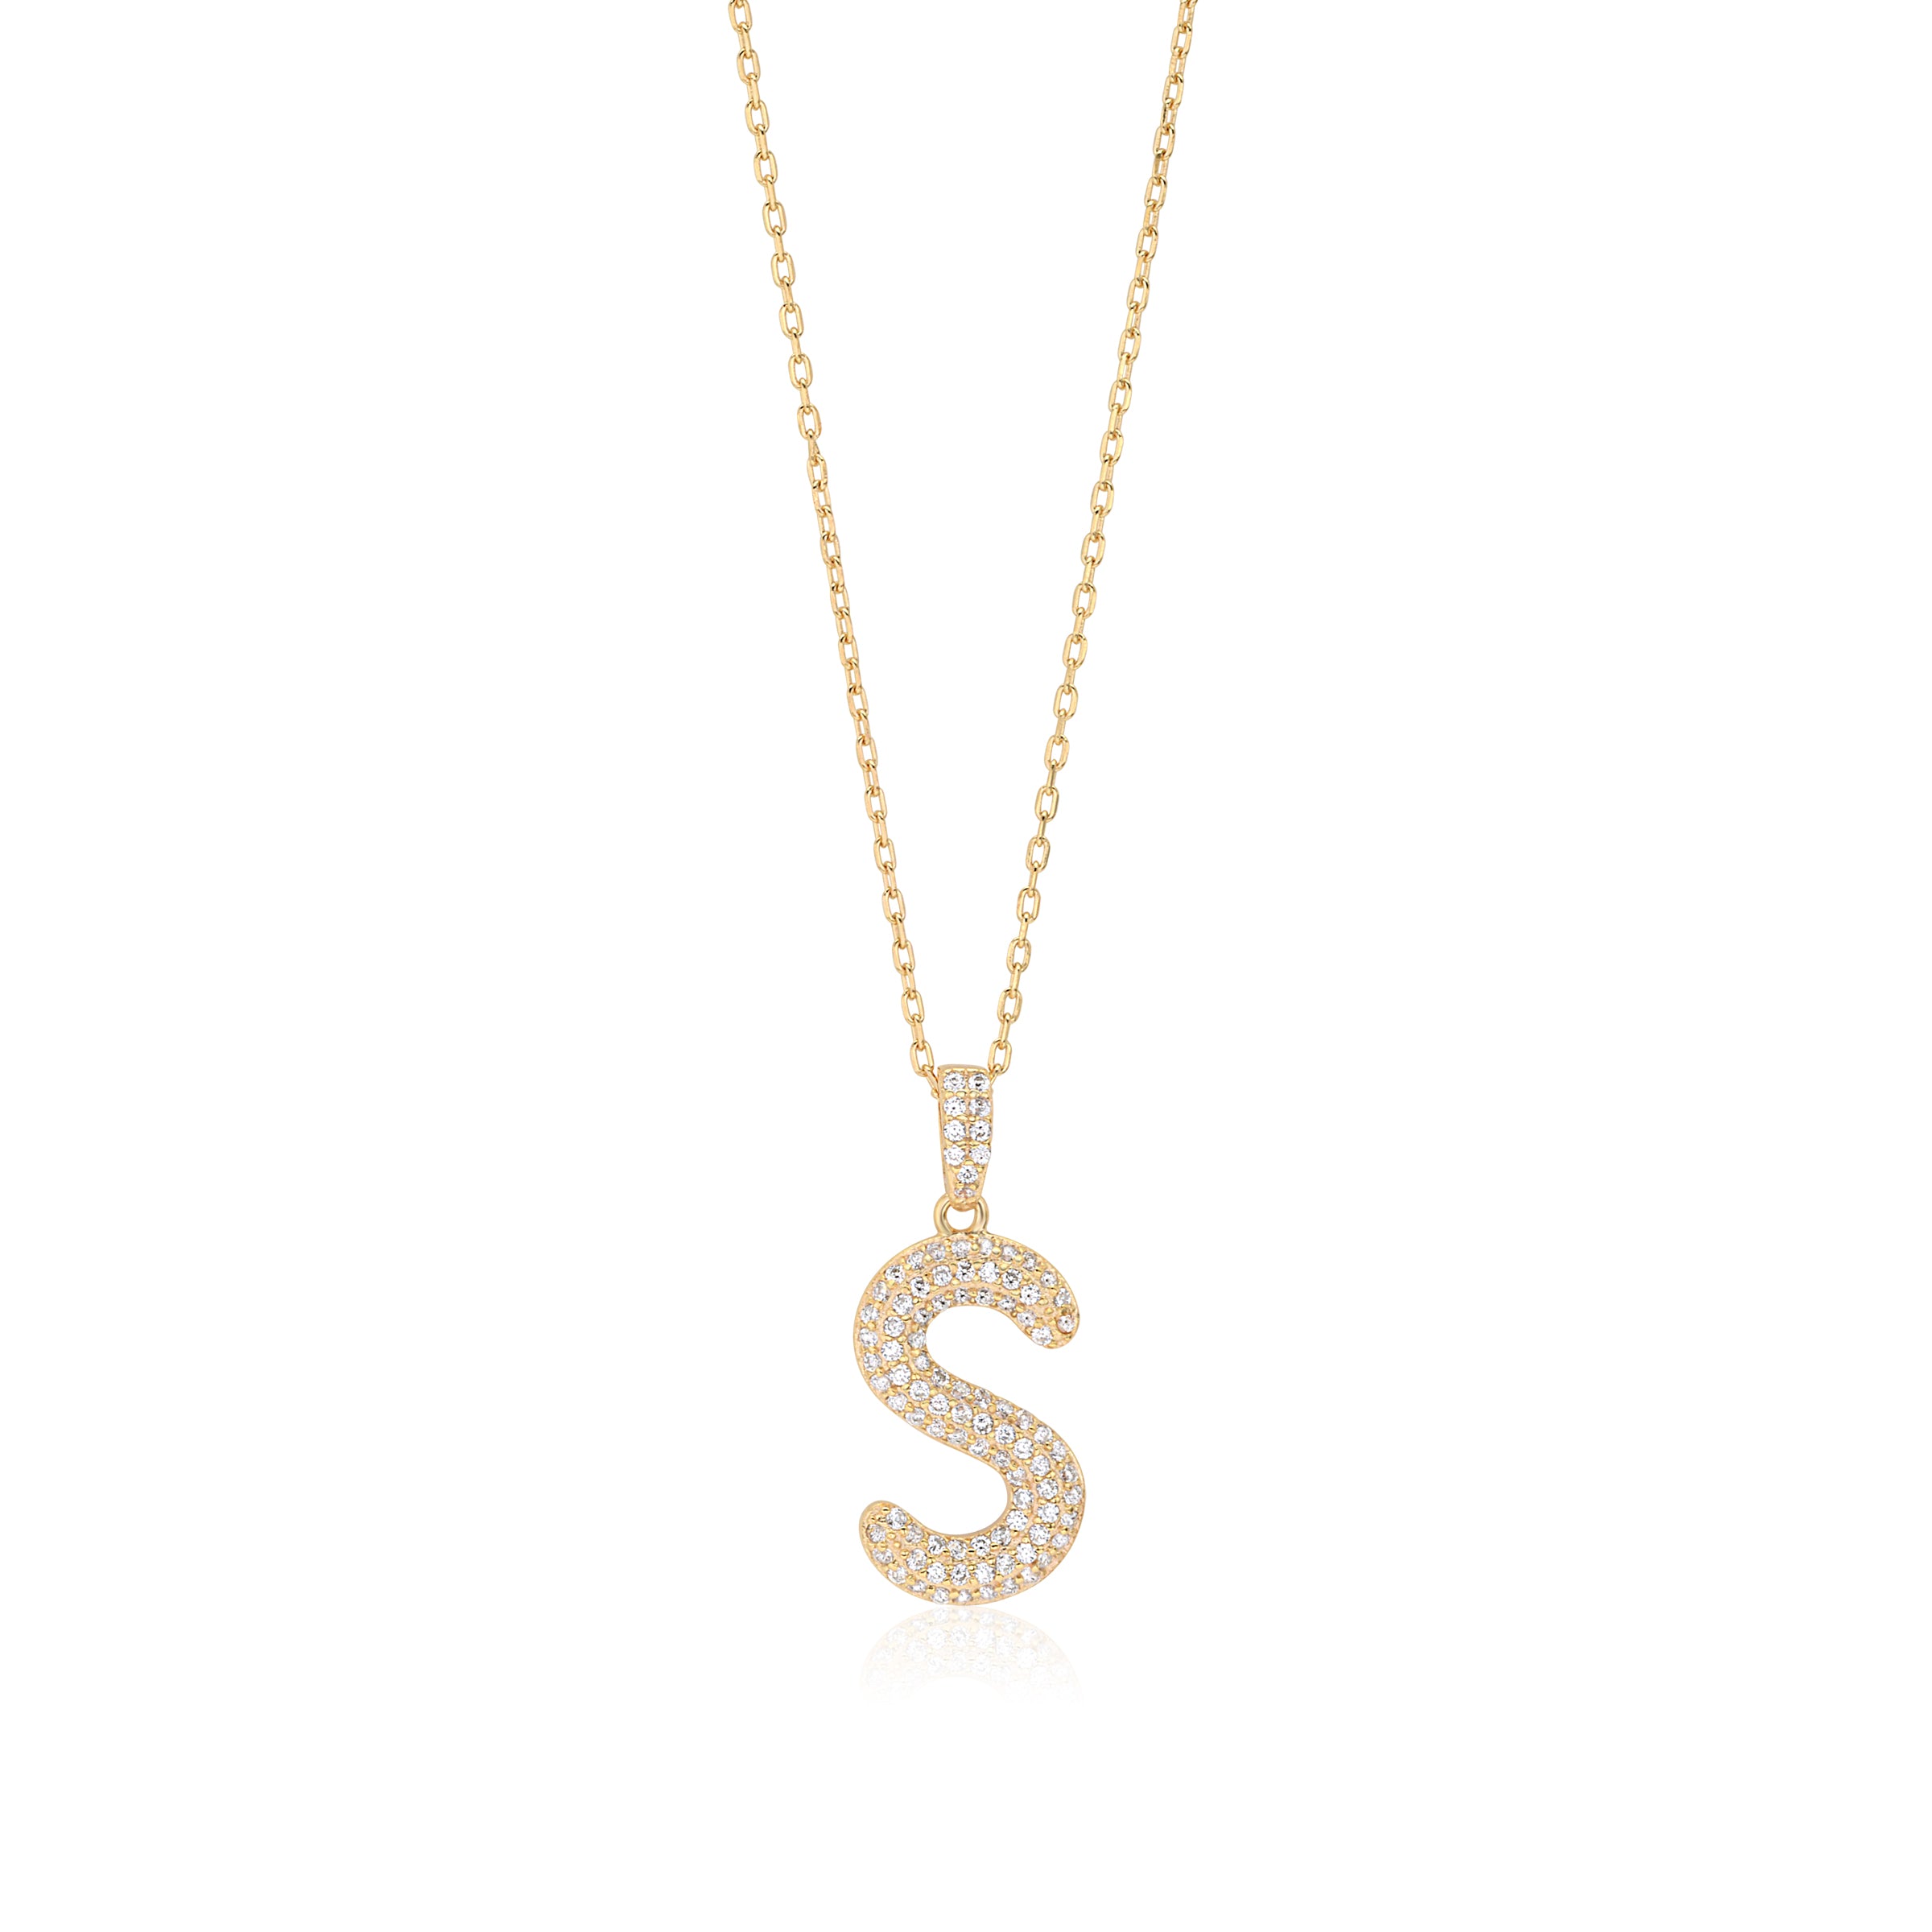 Initial Necklace in Gold-Plated Sterling Silver